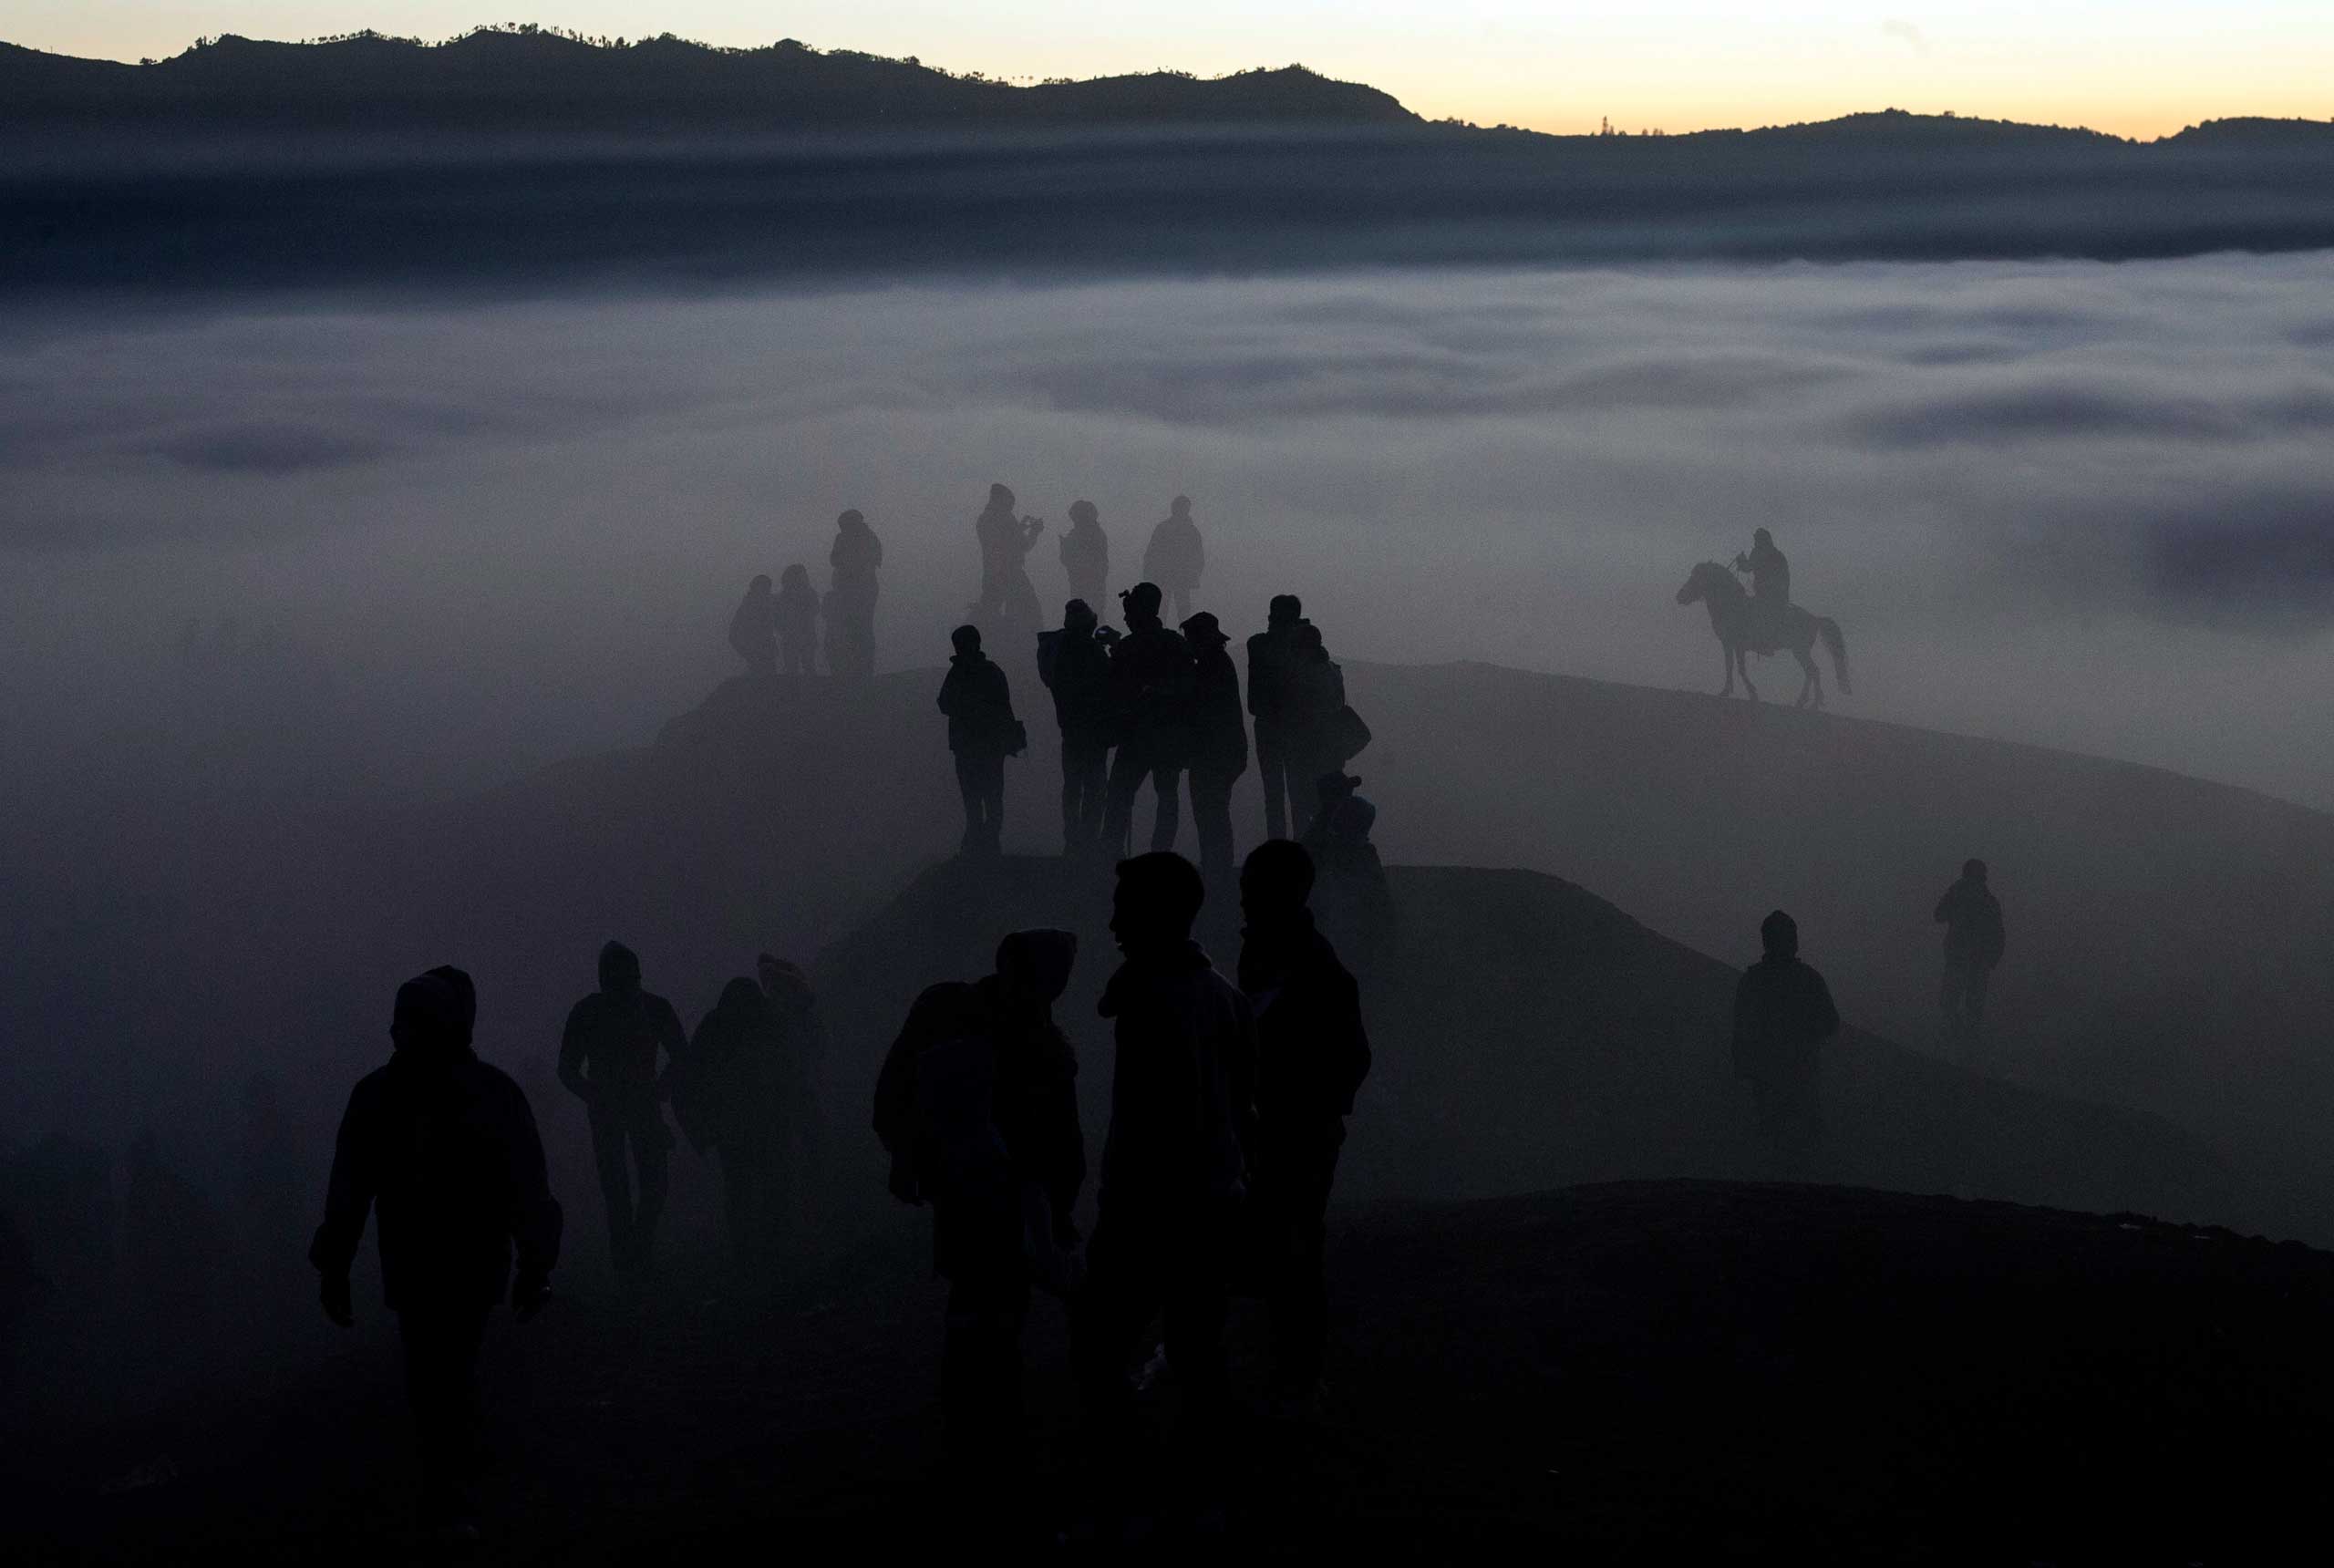 Indonesian villagers walk to the crater during the Kasodo ceremony at Mount Bromo, Probolinggo, Indonesia, Aug. 12, 2014.